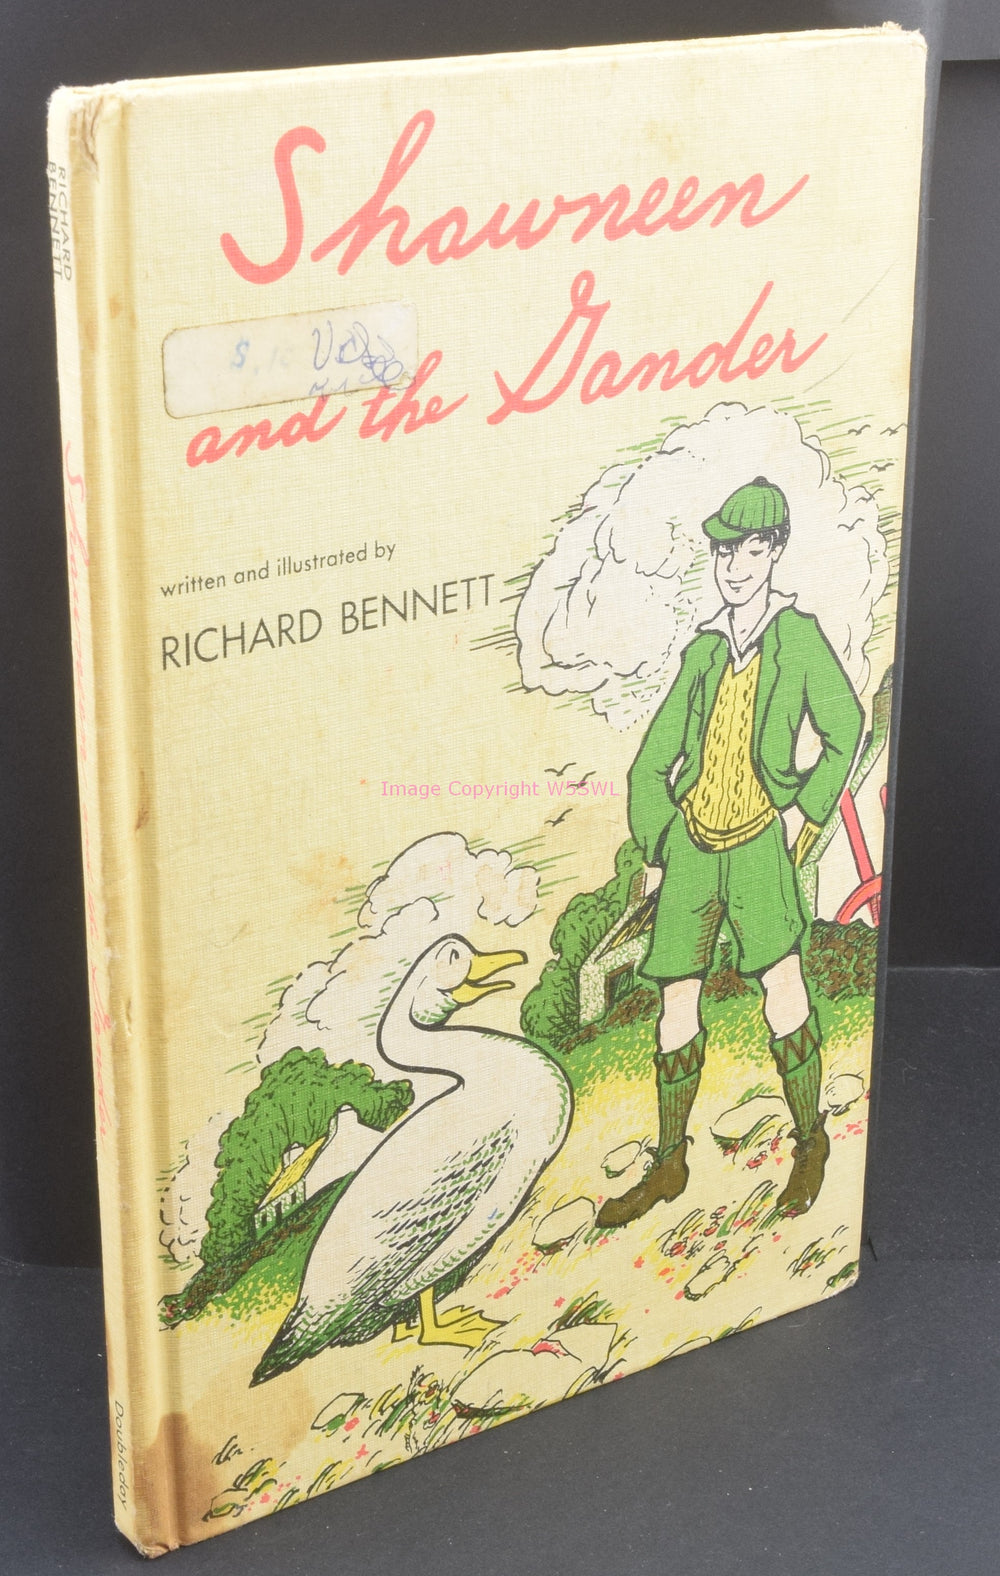 Shawneen And The Gander by Richard Bennett - READ INFO - Dave's Hobby Shop by W5SWL